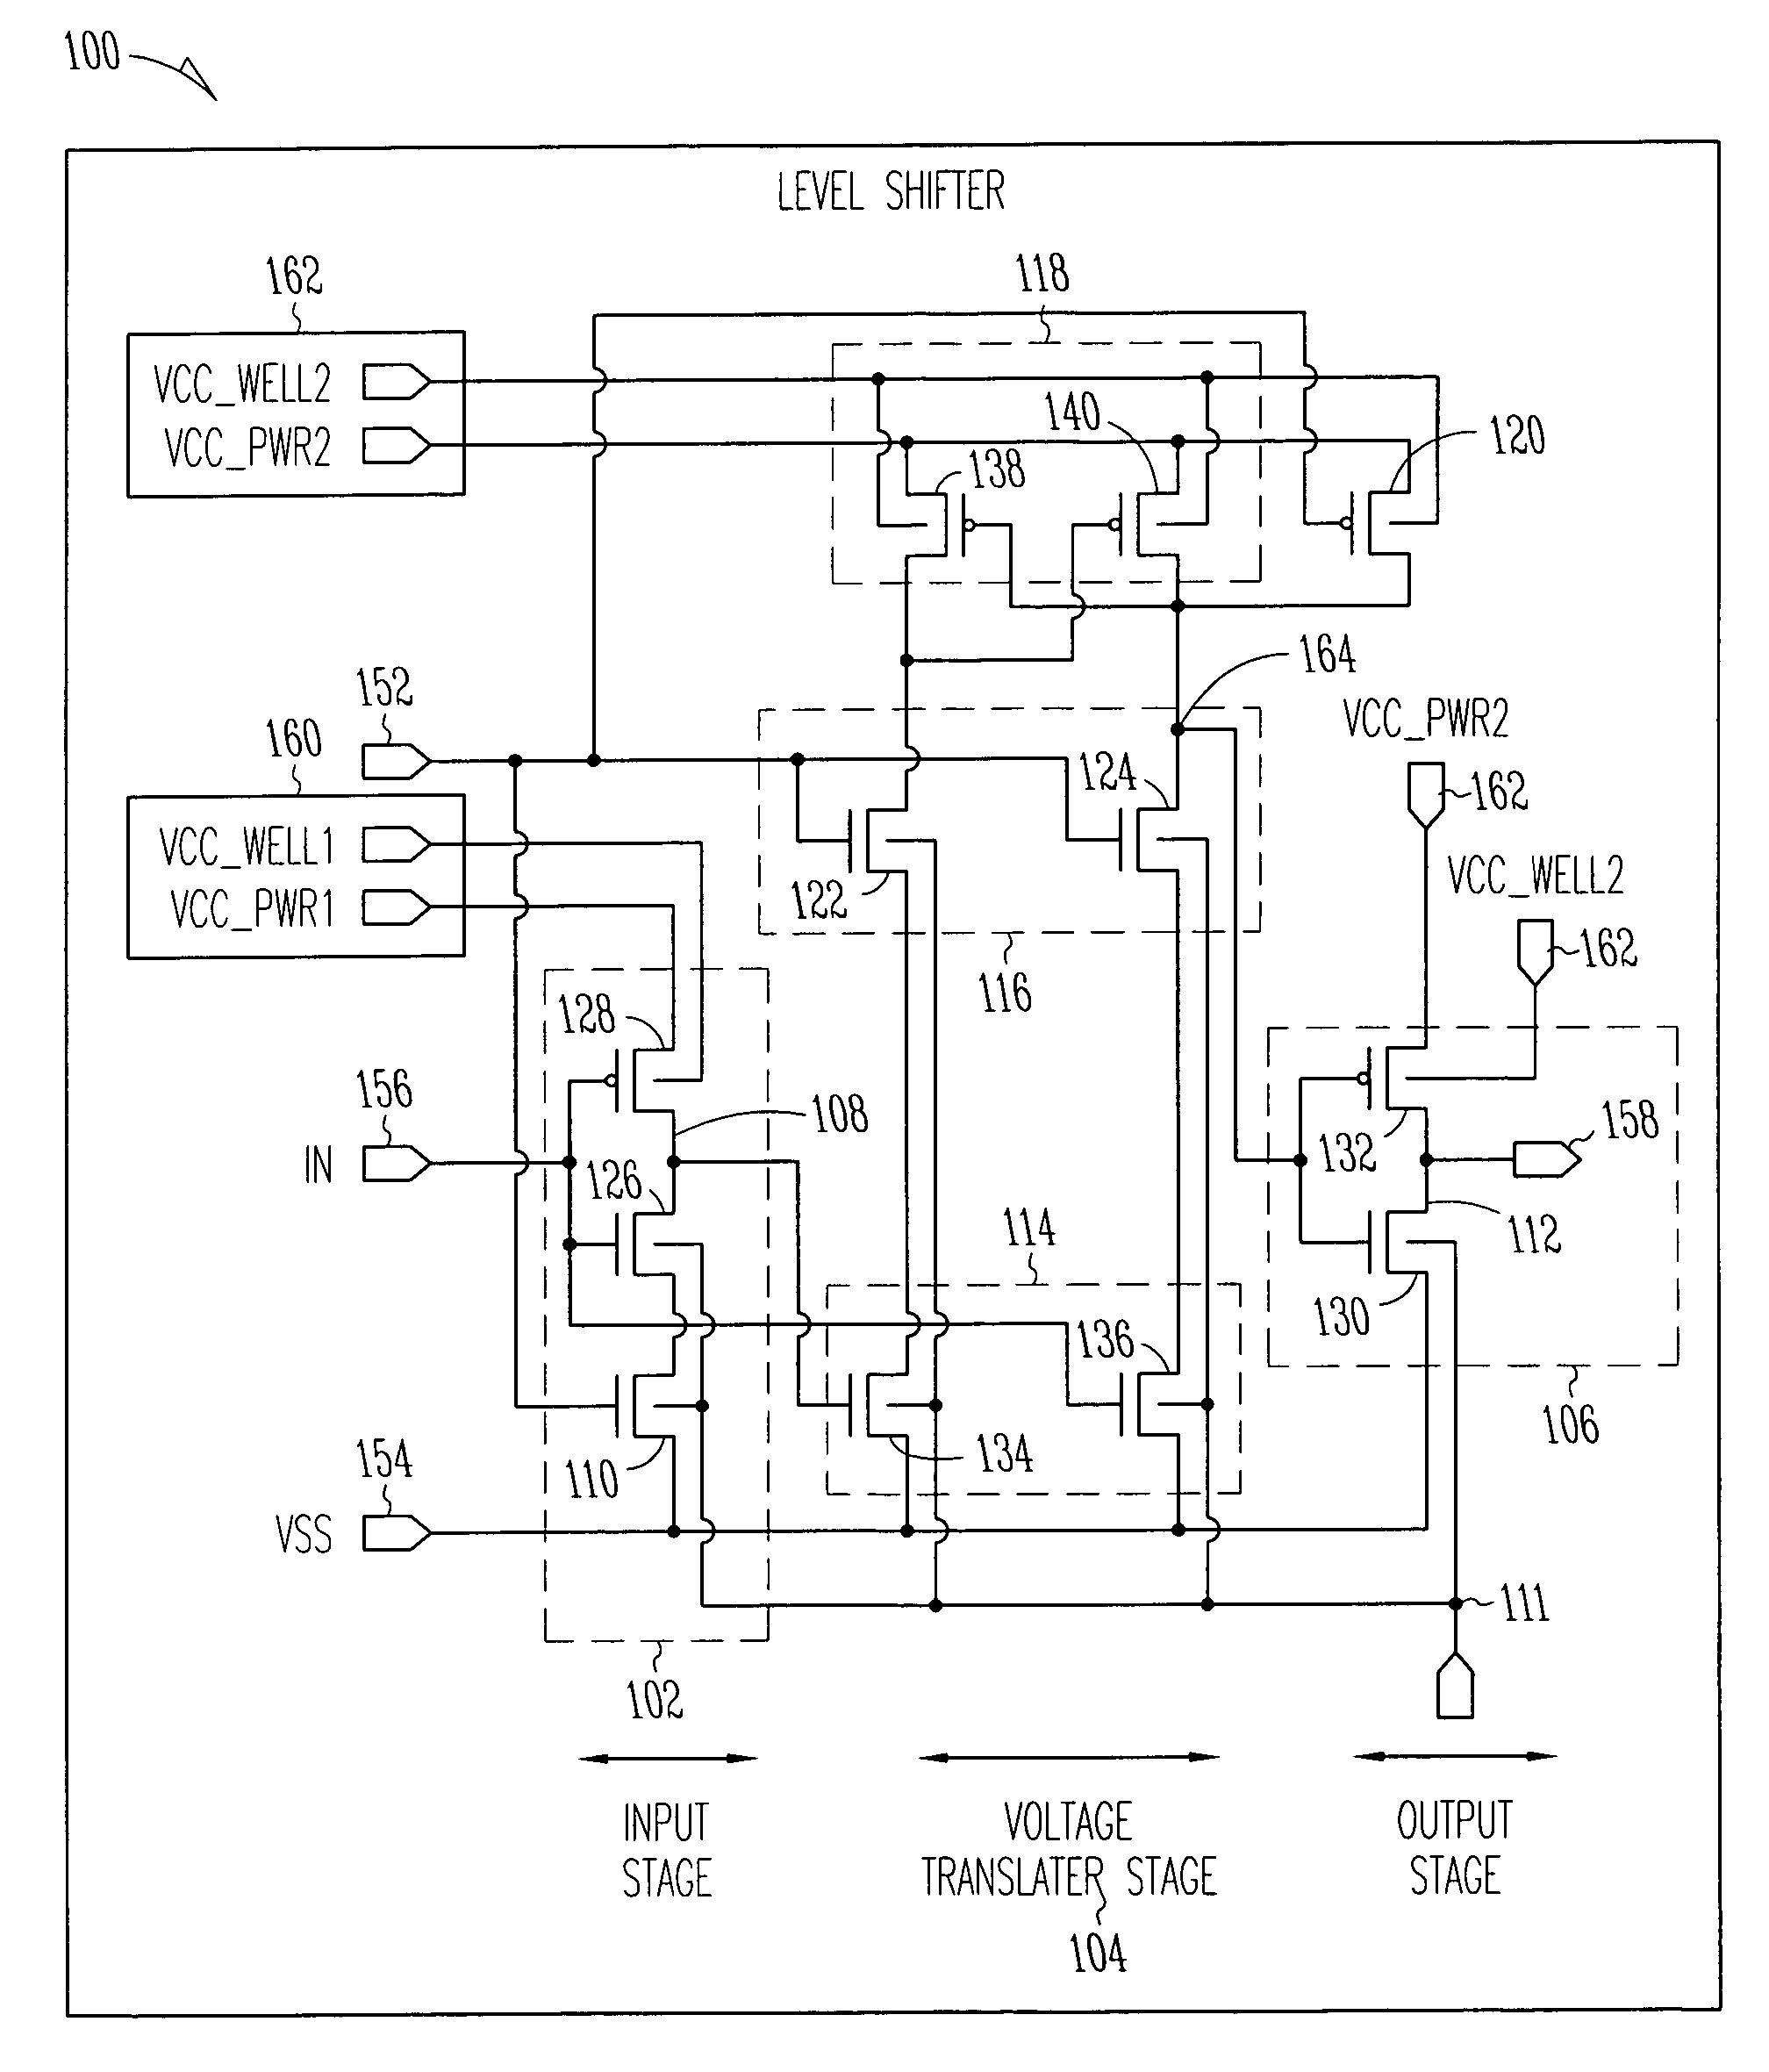 Low-leakage level shifter with integrated firewall and method